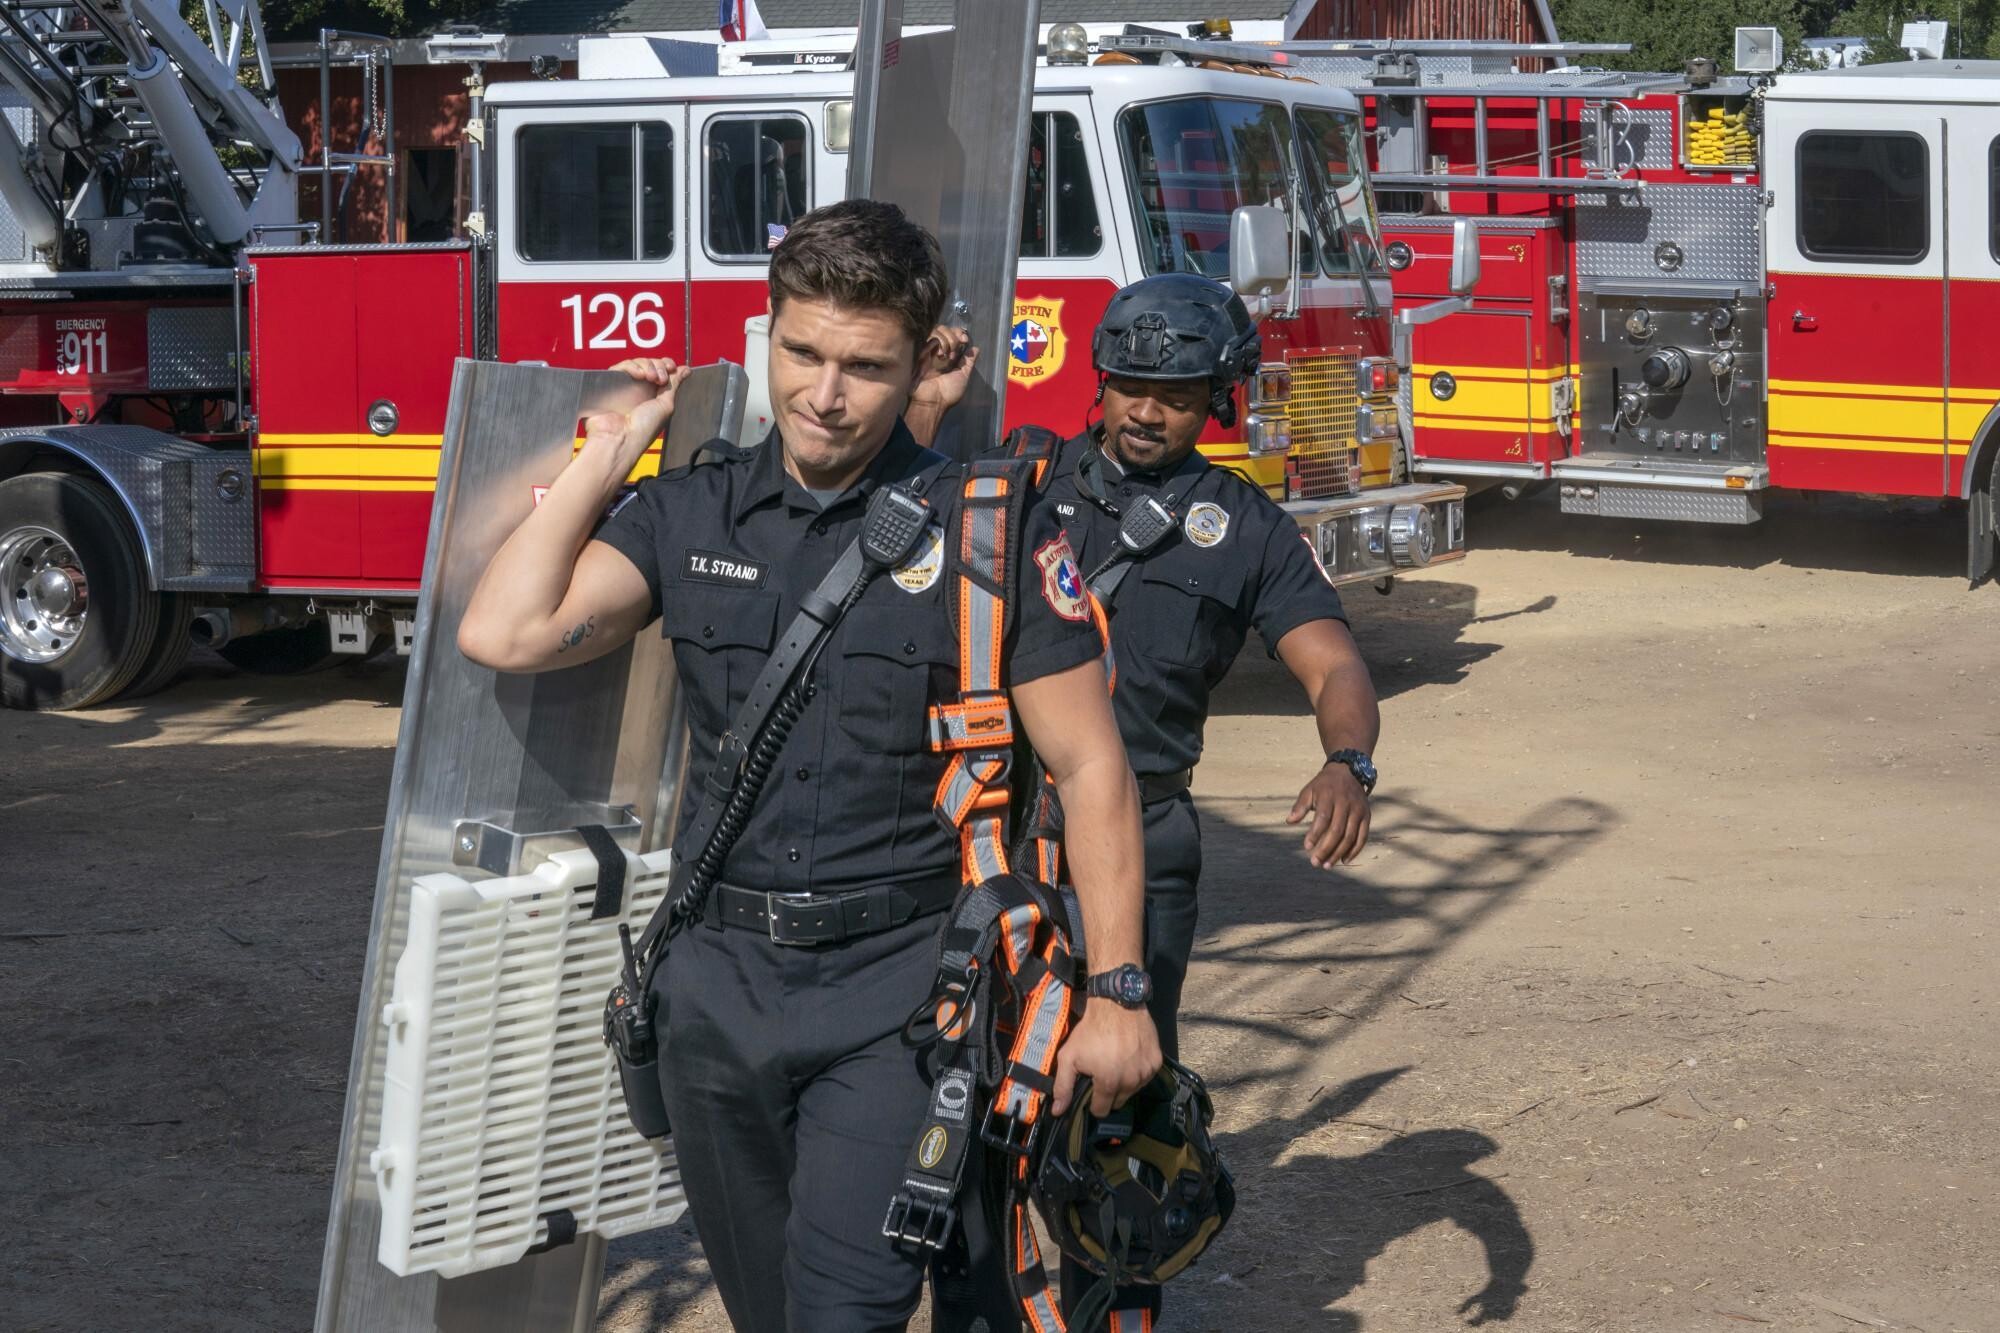 9-1-1: Lone Star (TV Series): Protective Fire Shields, Fireproof Gear, Fire Truck, Tyler Strand And Paul Strickland, Texas Proud. 2000x1340 HD Background.